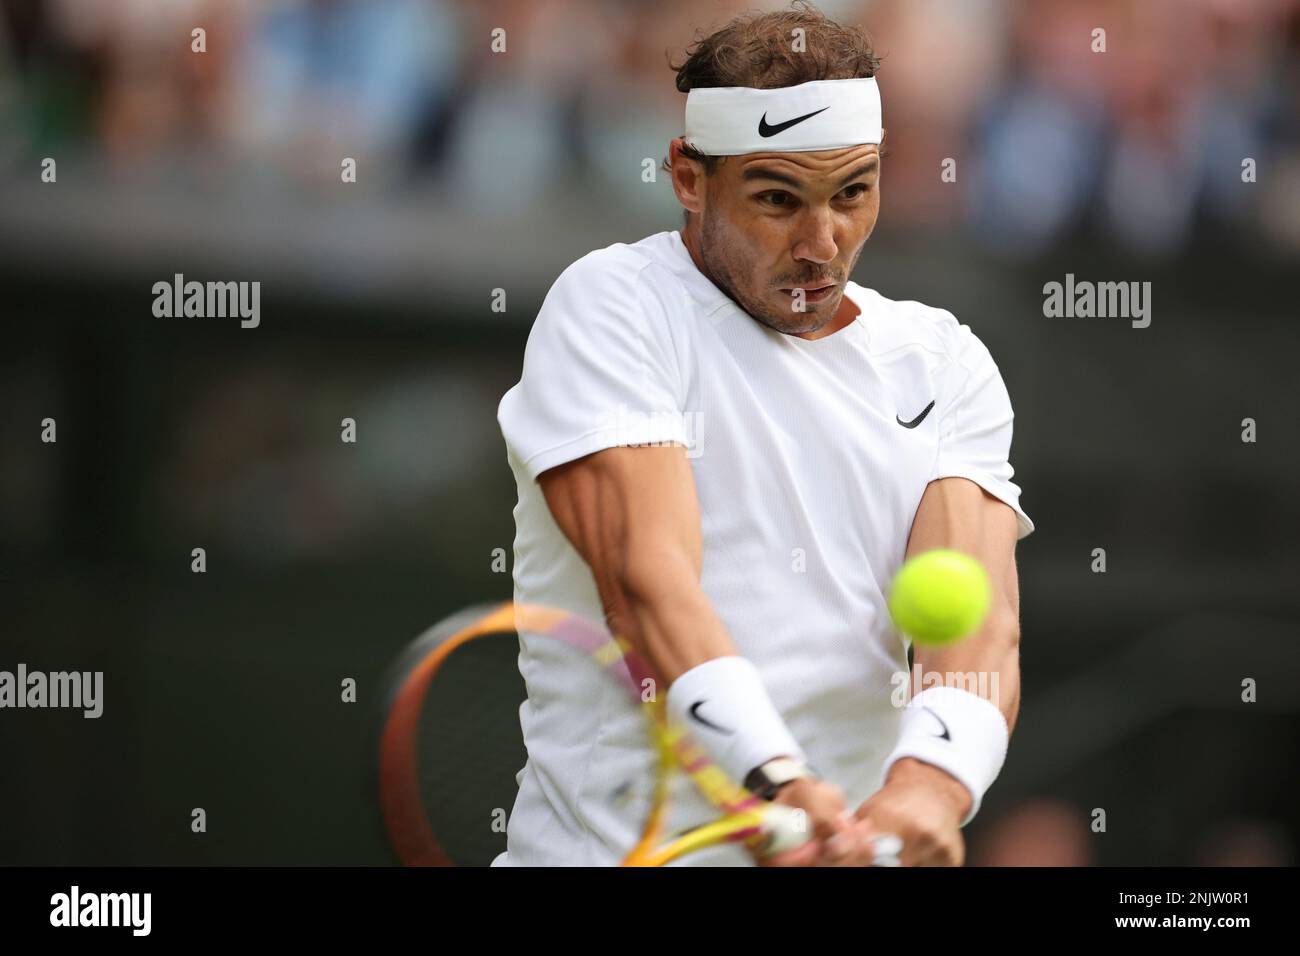 Rafael Nadal of Spain hits a ball against Lorenzo Sonego of Italy during the third round of the gentlemens singles in the Championships, Wimbledon at All England Lawn Tennis and Croquet Club